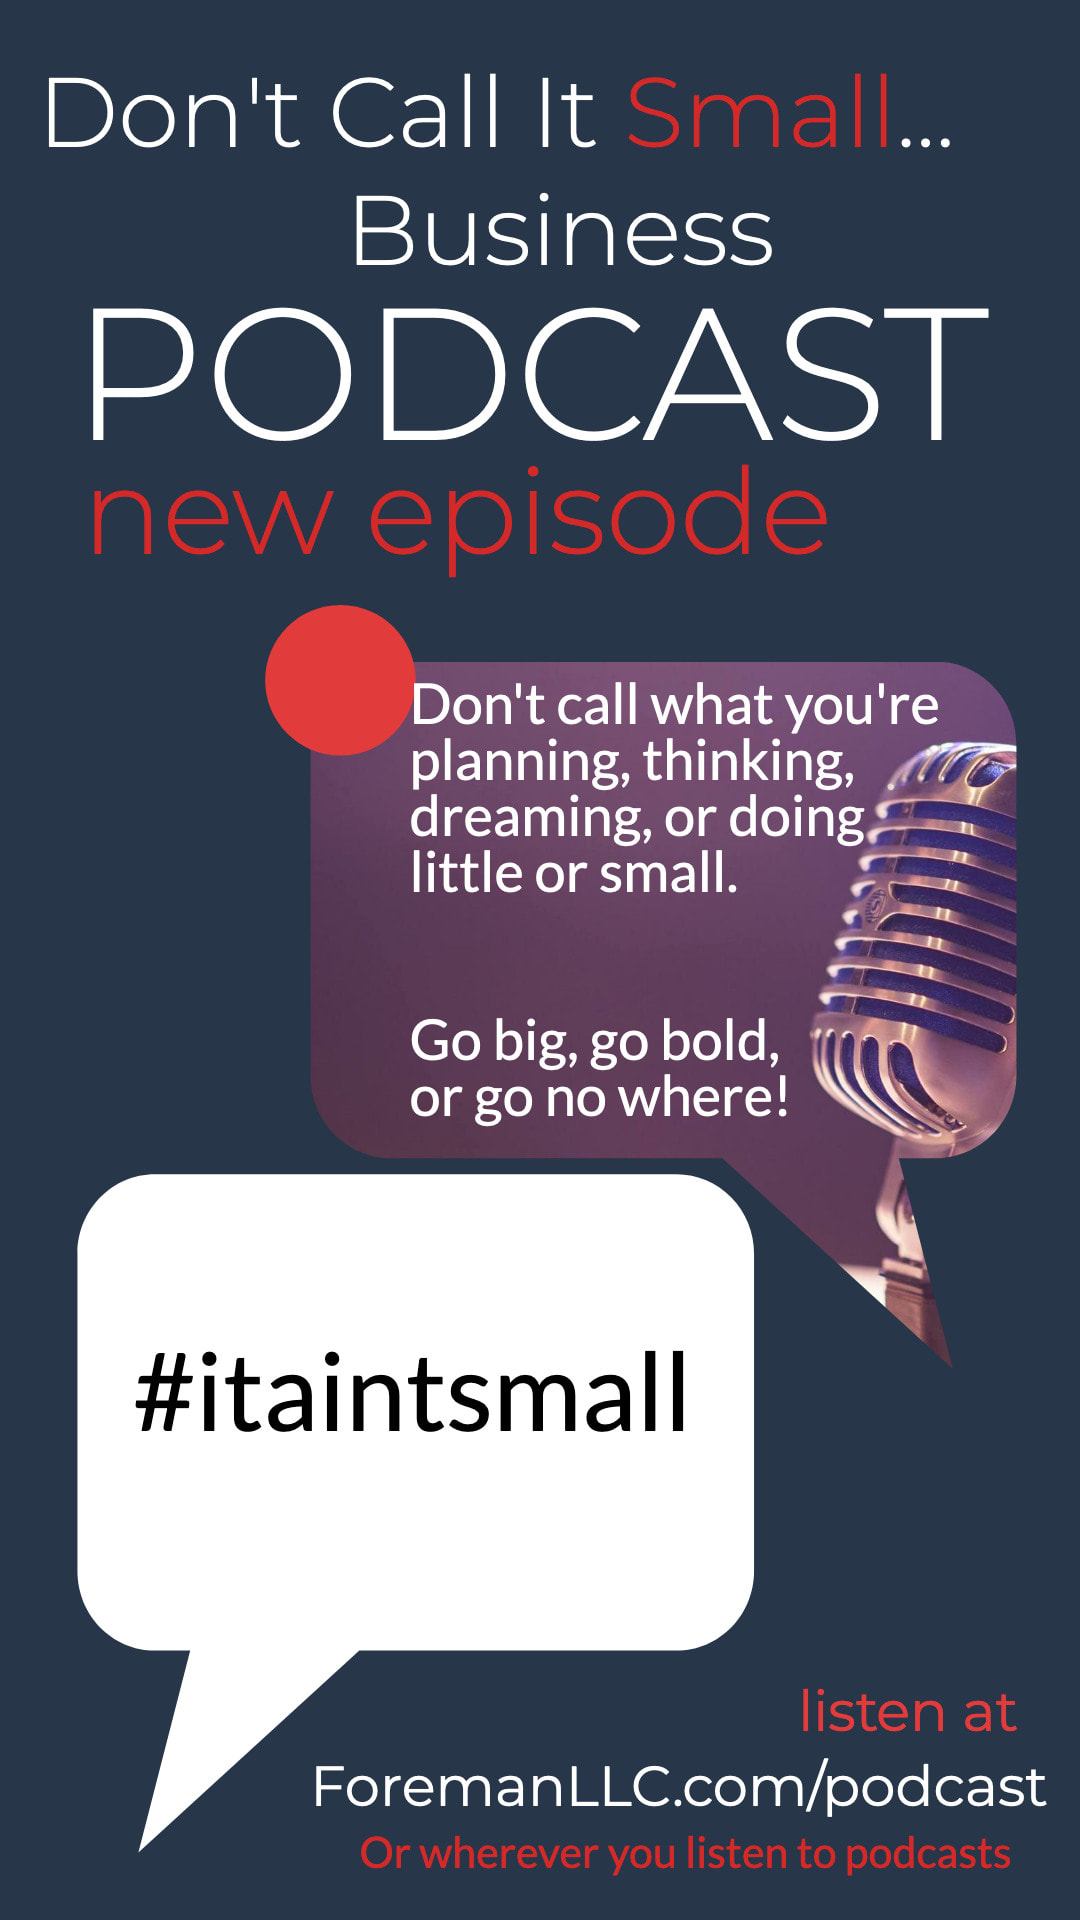 image of Don't Call It Small Business podcast slogan, hashtag, and other promo